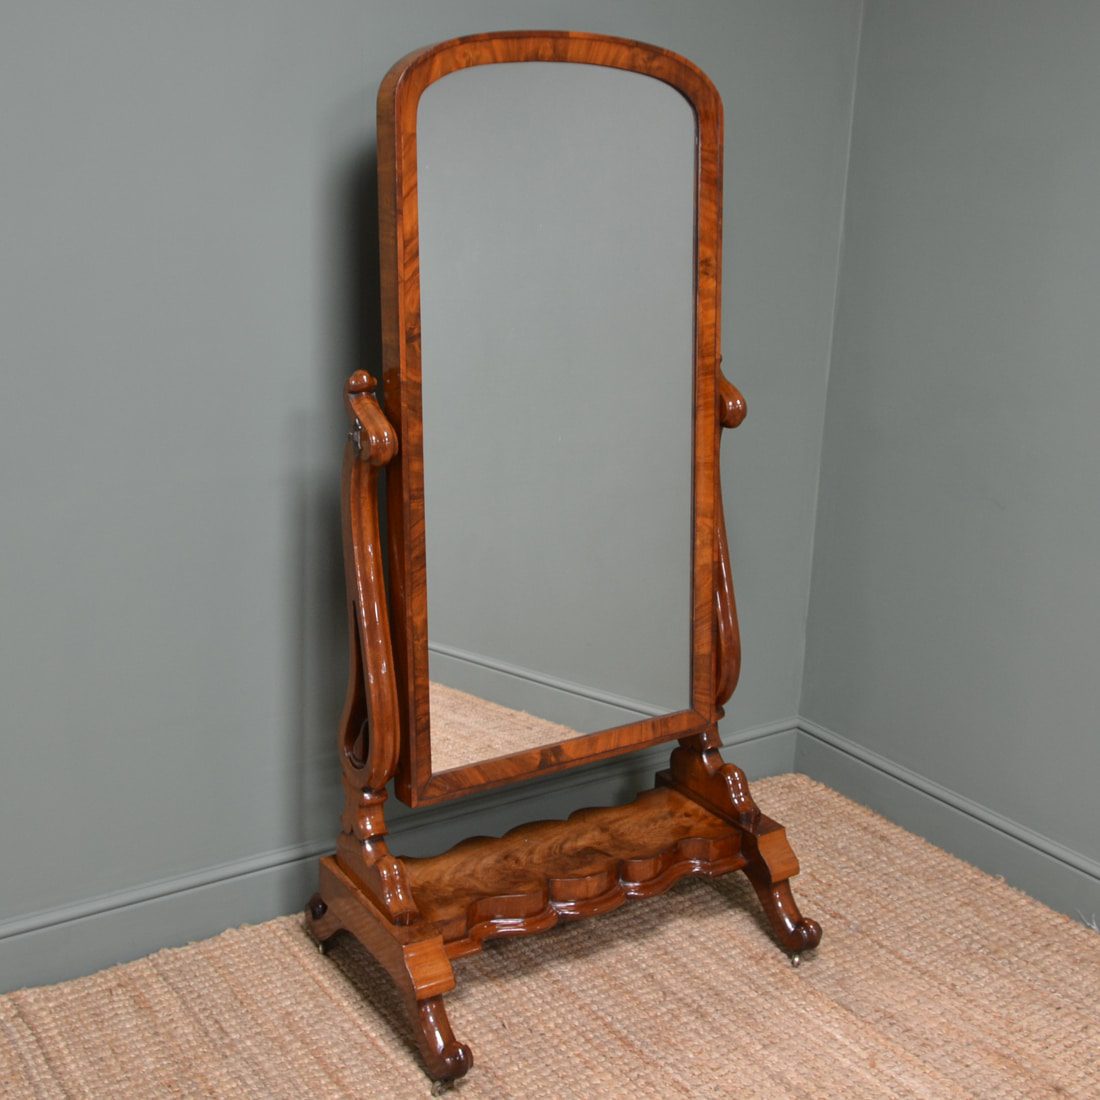 Antique Cheval Mirrors Antiques World, Small Antique Standing Mirror